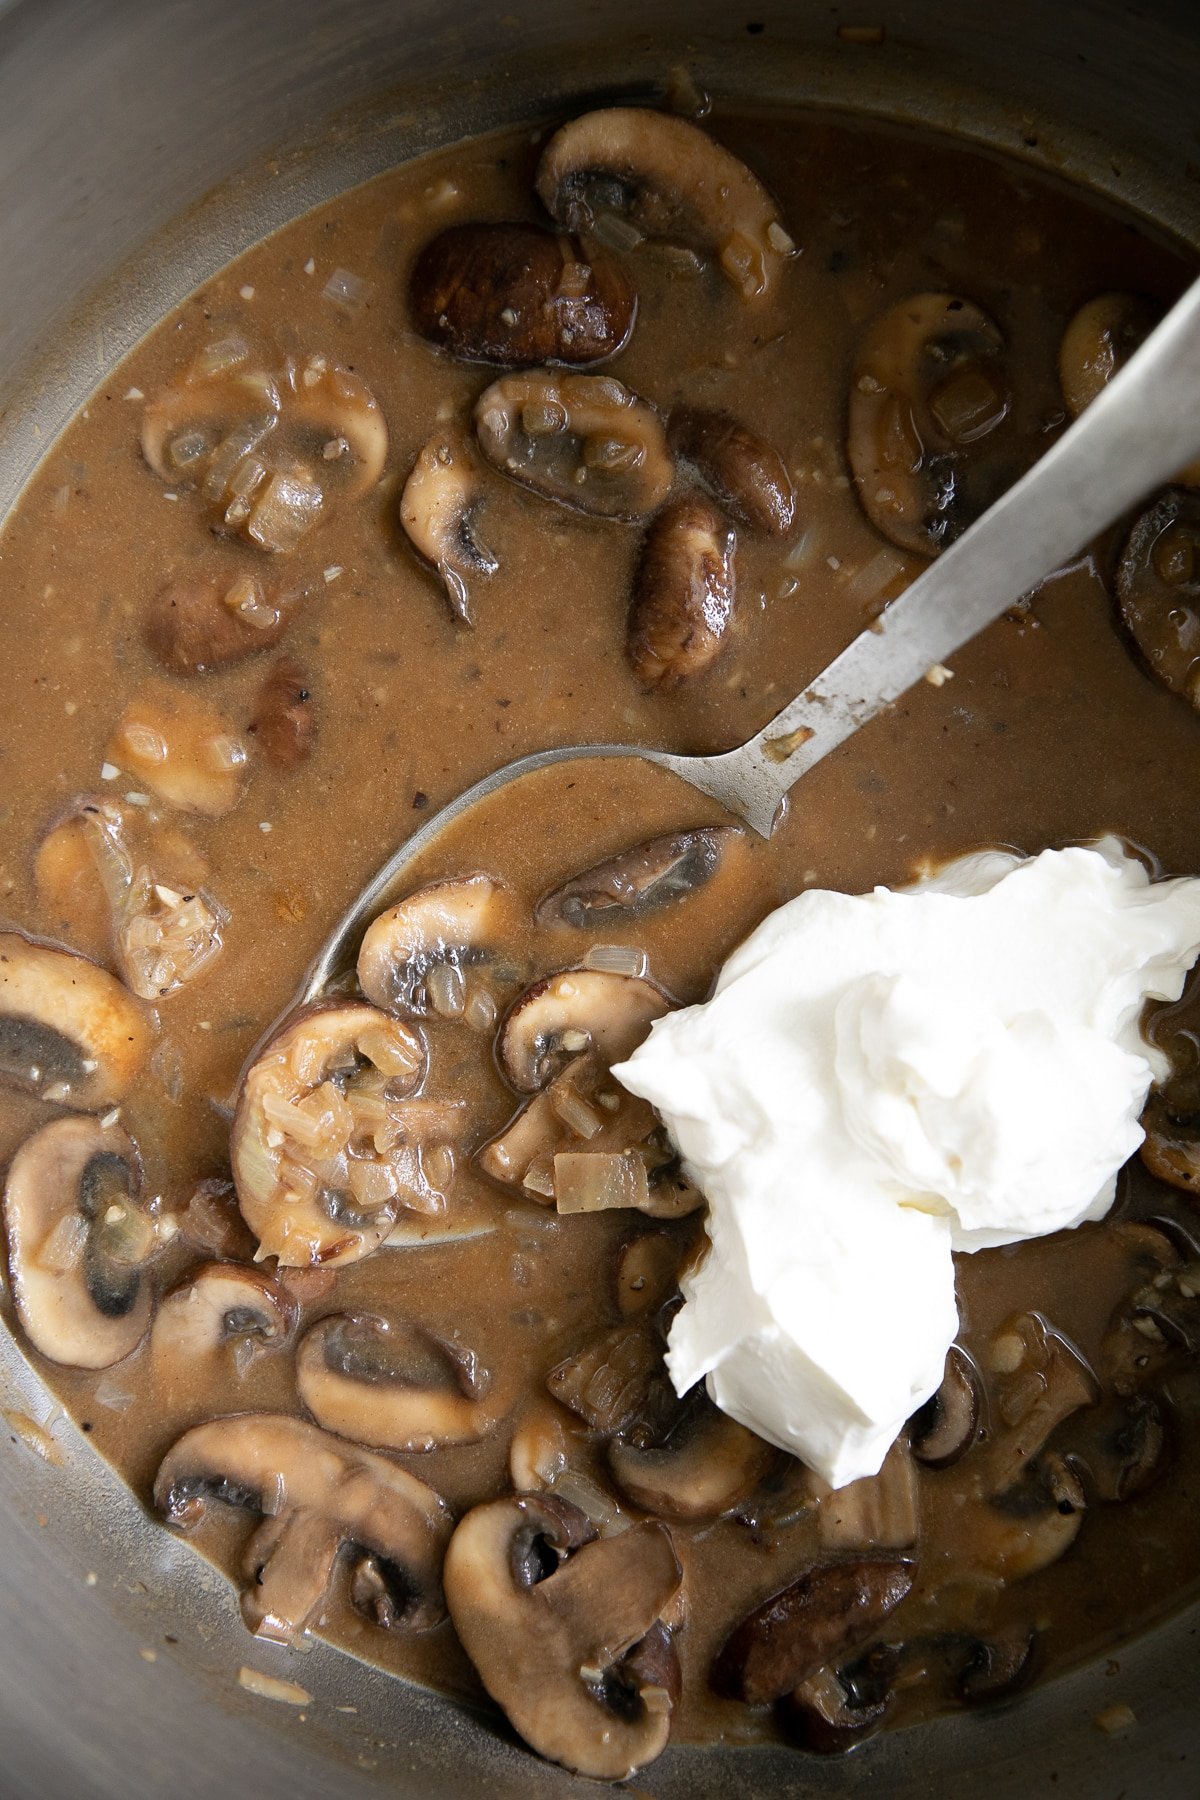 Mushrooms in a savory beef gravy with sour cream.